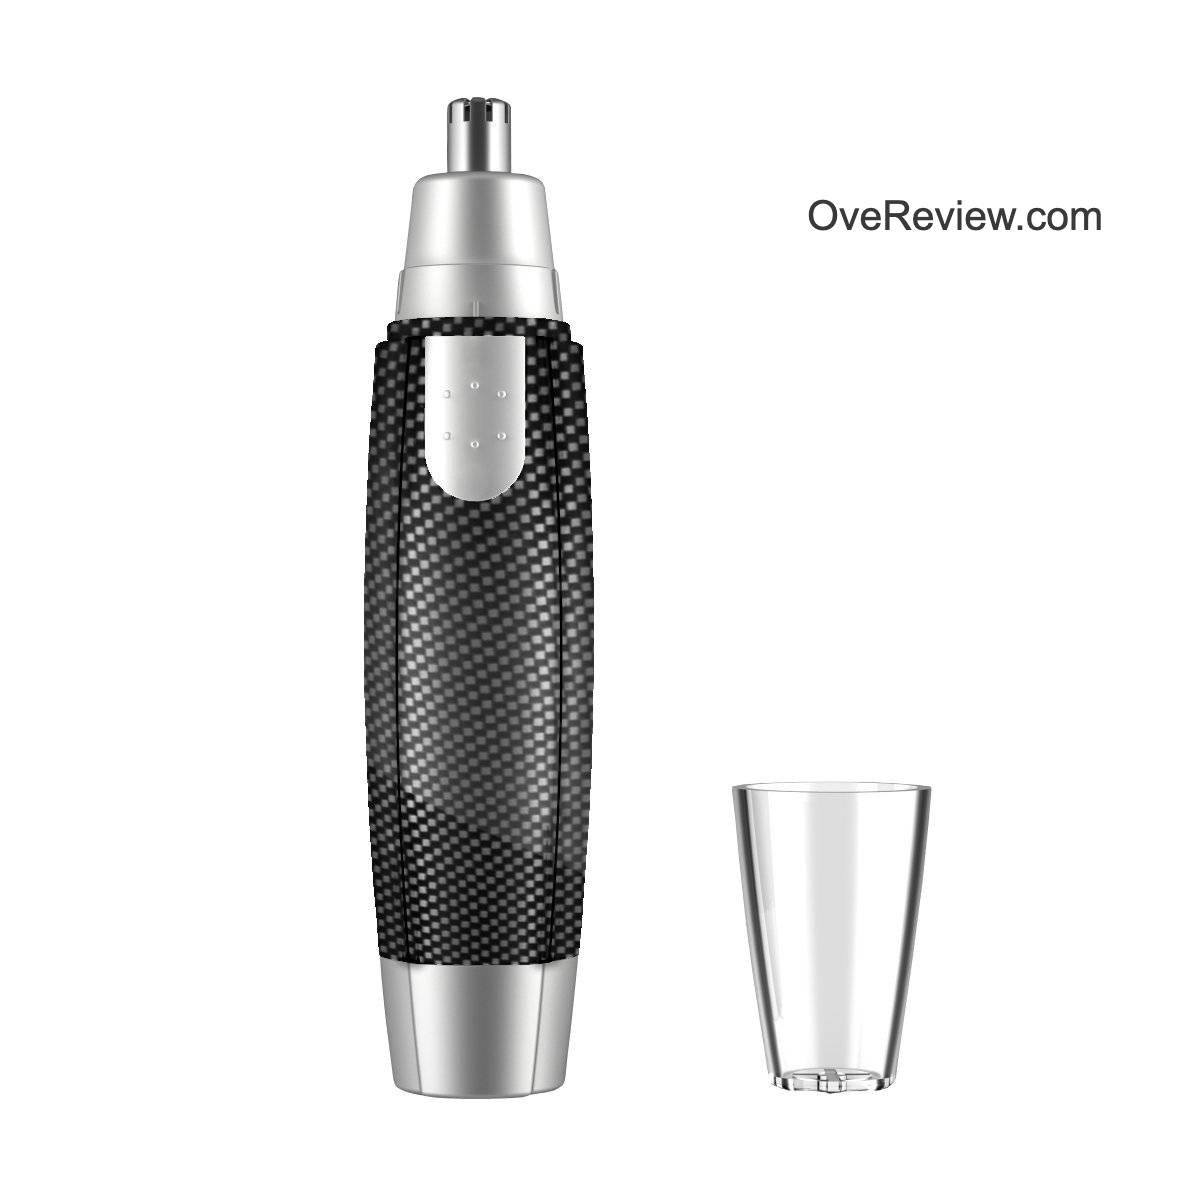 10 Best Nose Hair Trimmer For Men - {Buying Guide} 7